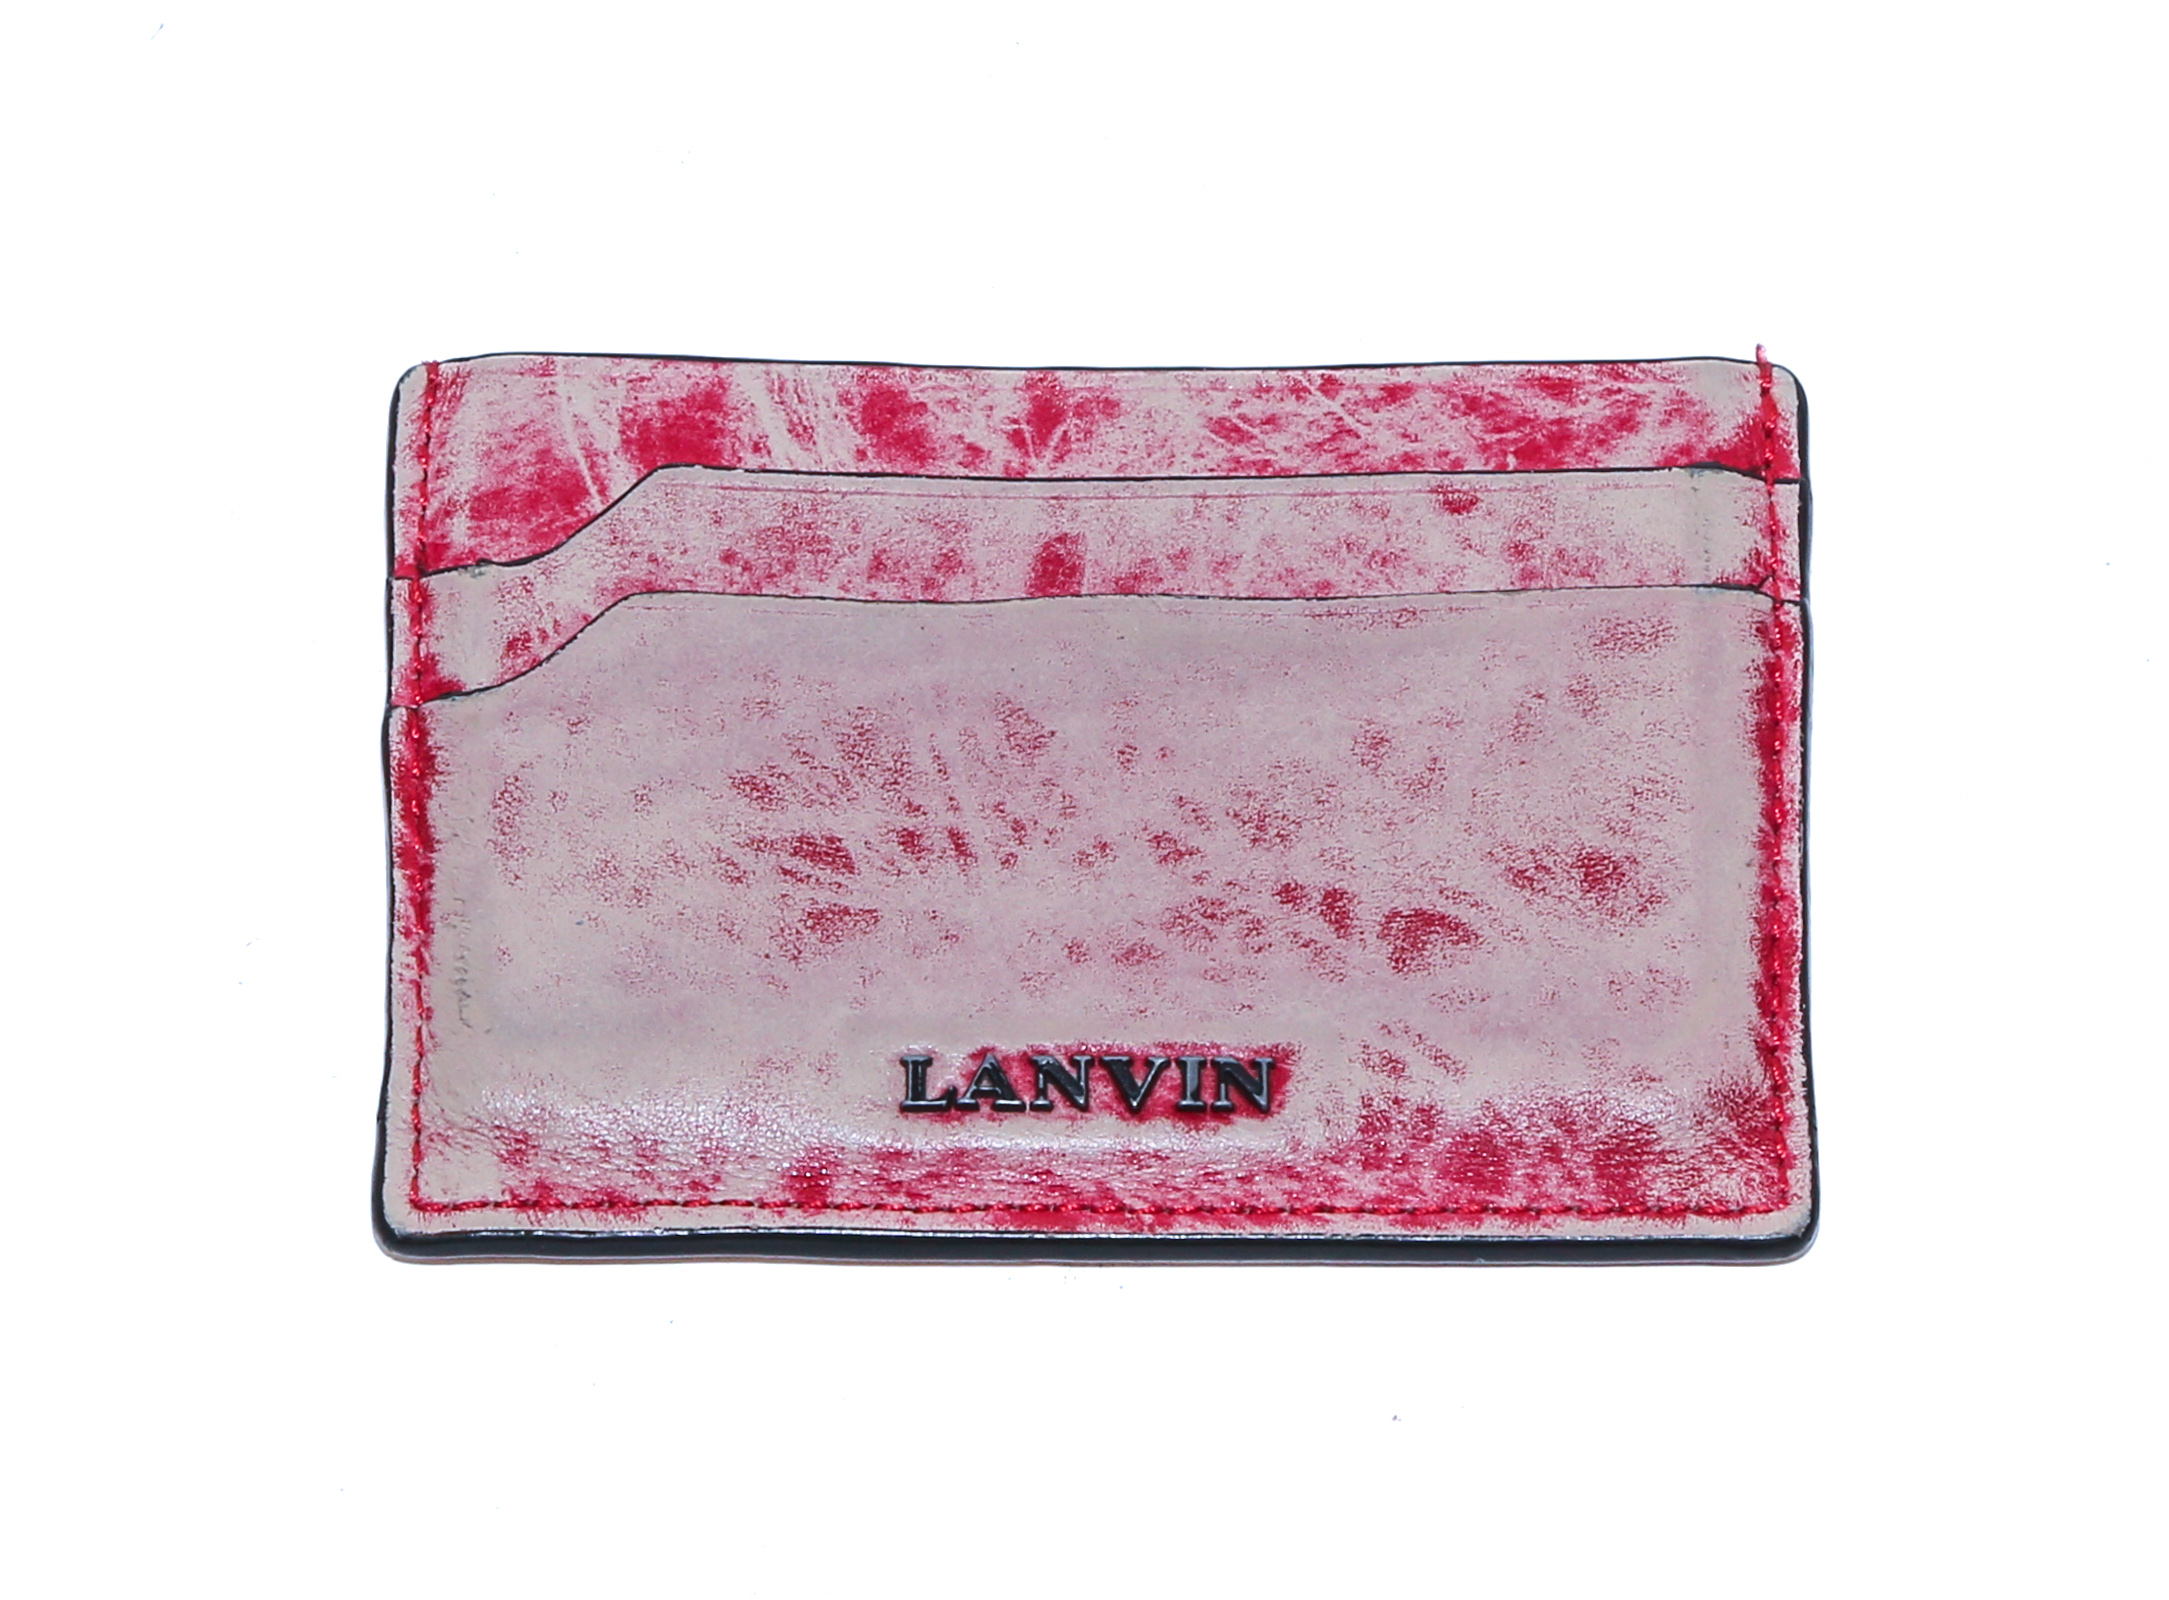 A LANVIN LEATHER CARD HOLDER A